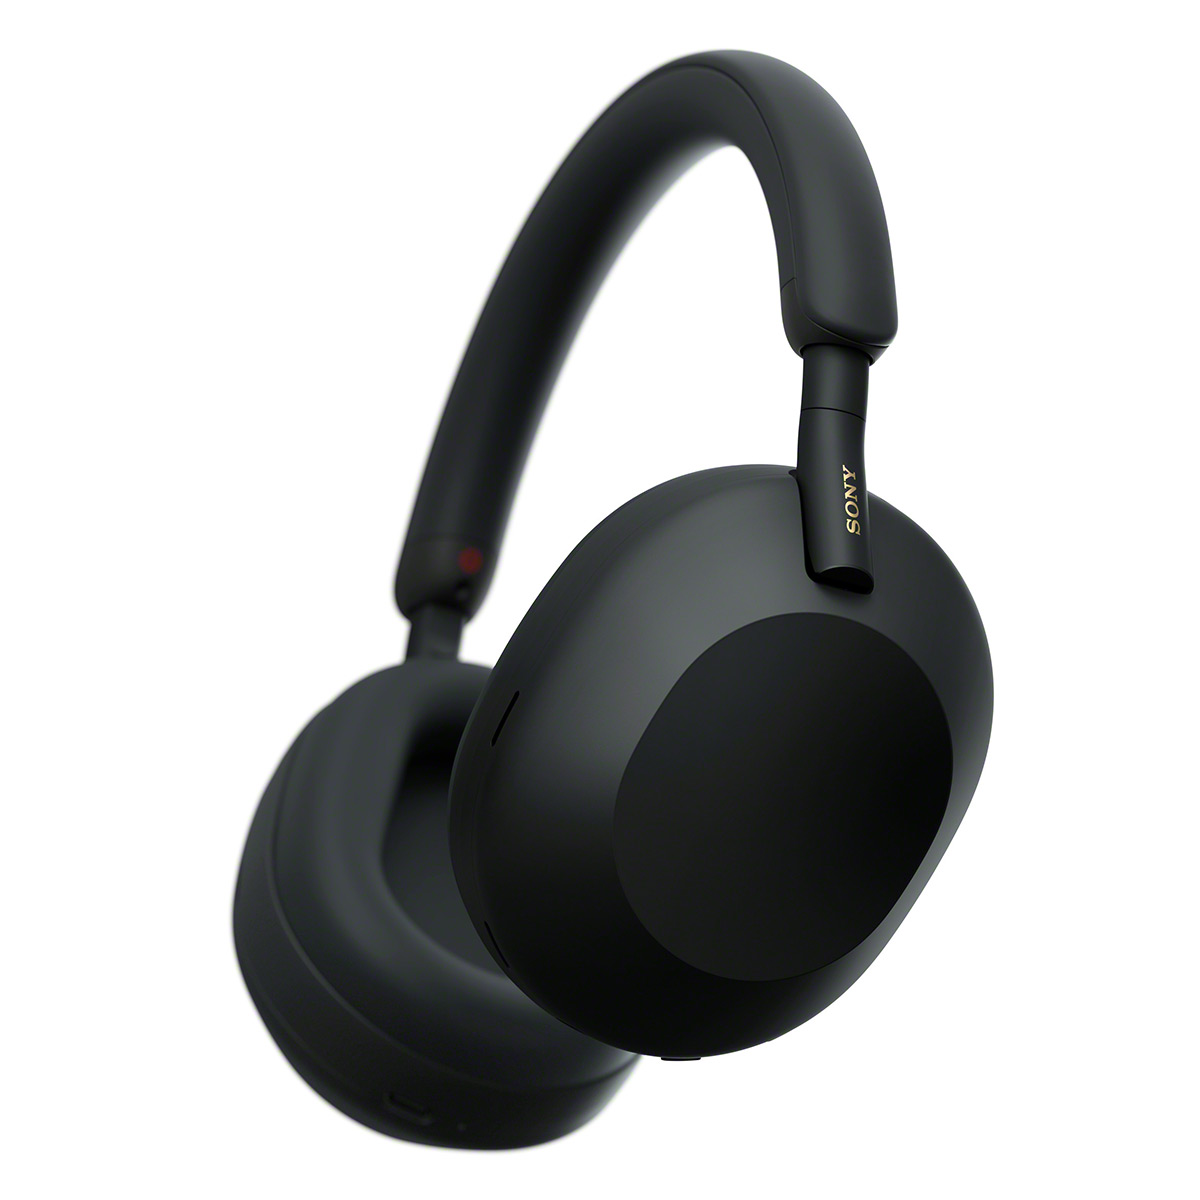 Sony WH-1000XM5 The Best Wireless Noise Canceling Headphones, Black - image 1 of 12